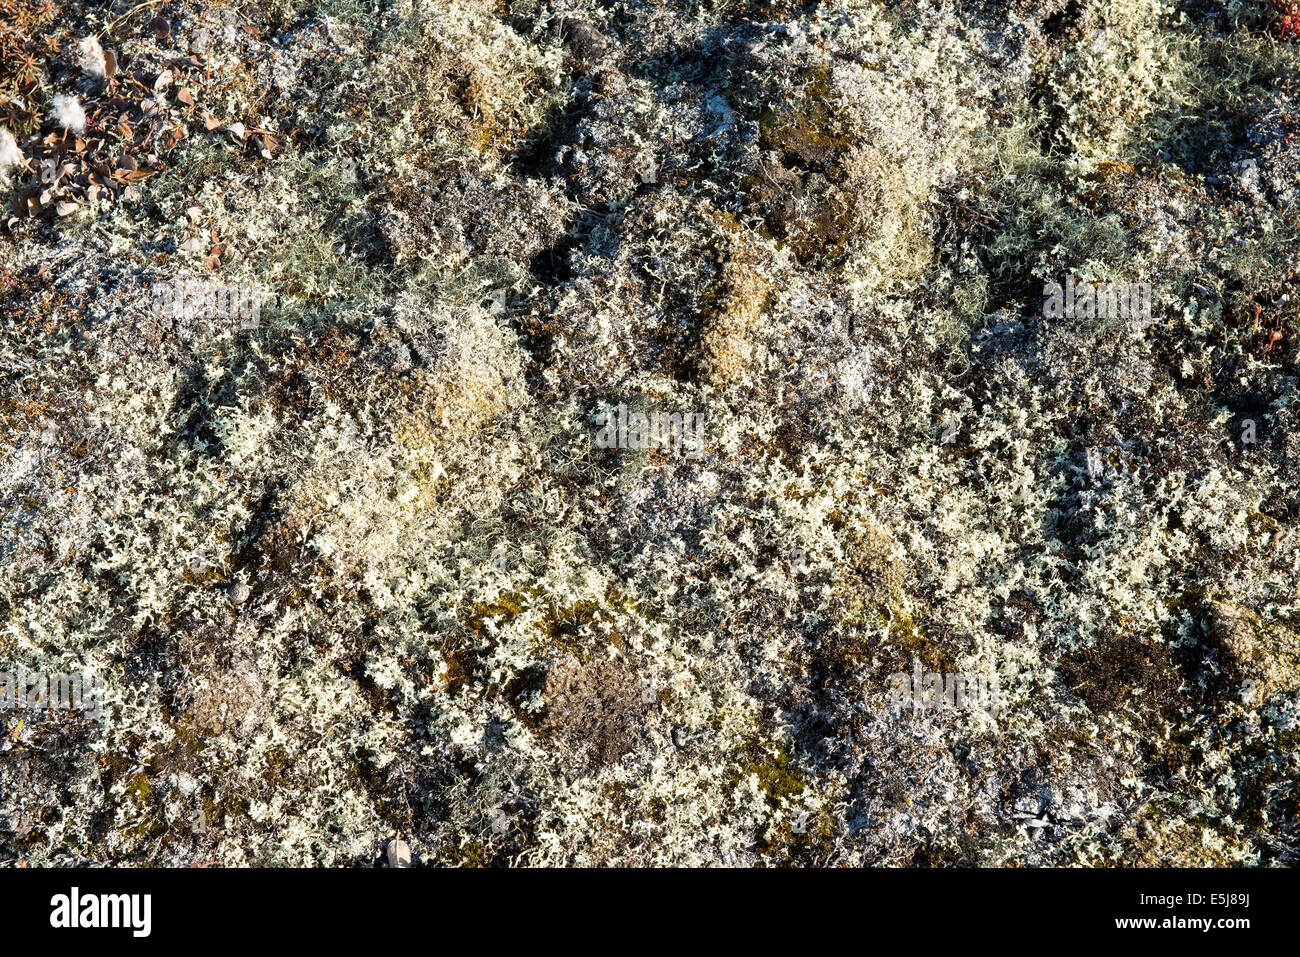 Arctic vegetation on Greenland in summer with lichen, moss, dwarf birch and other plants Stock Photo